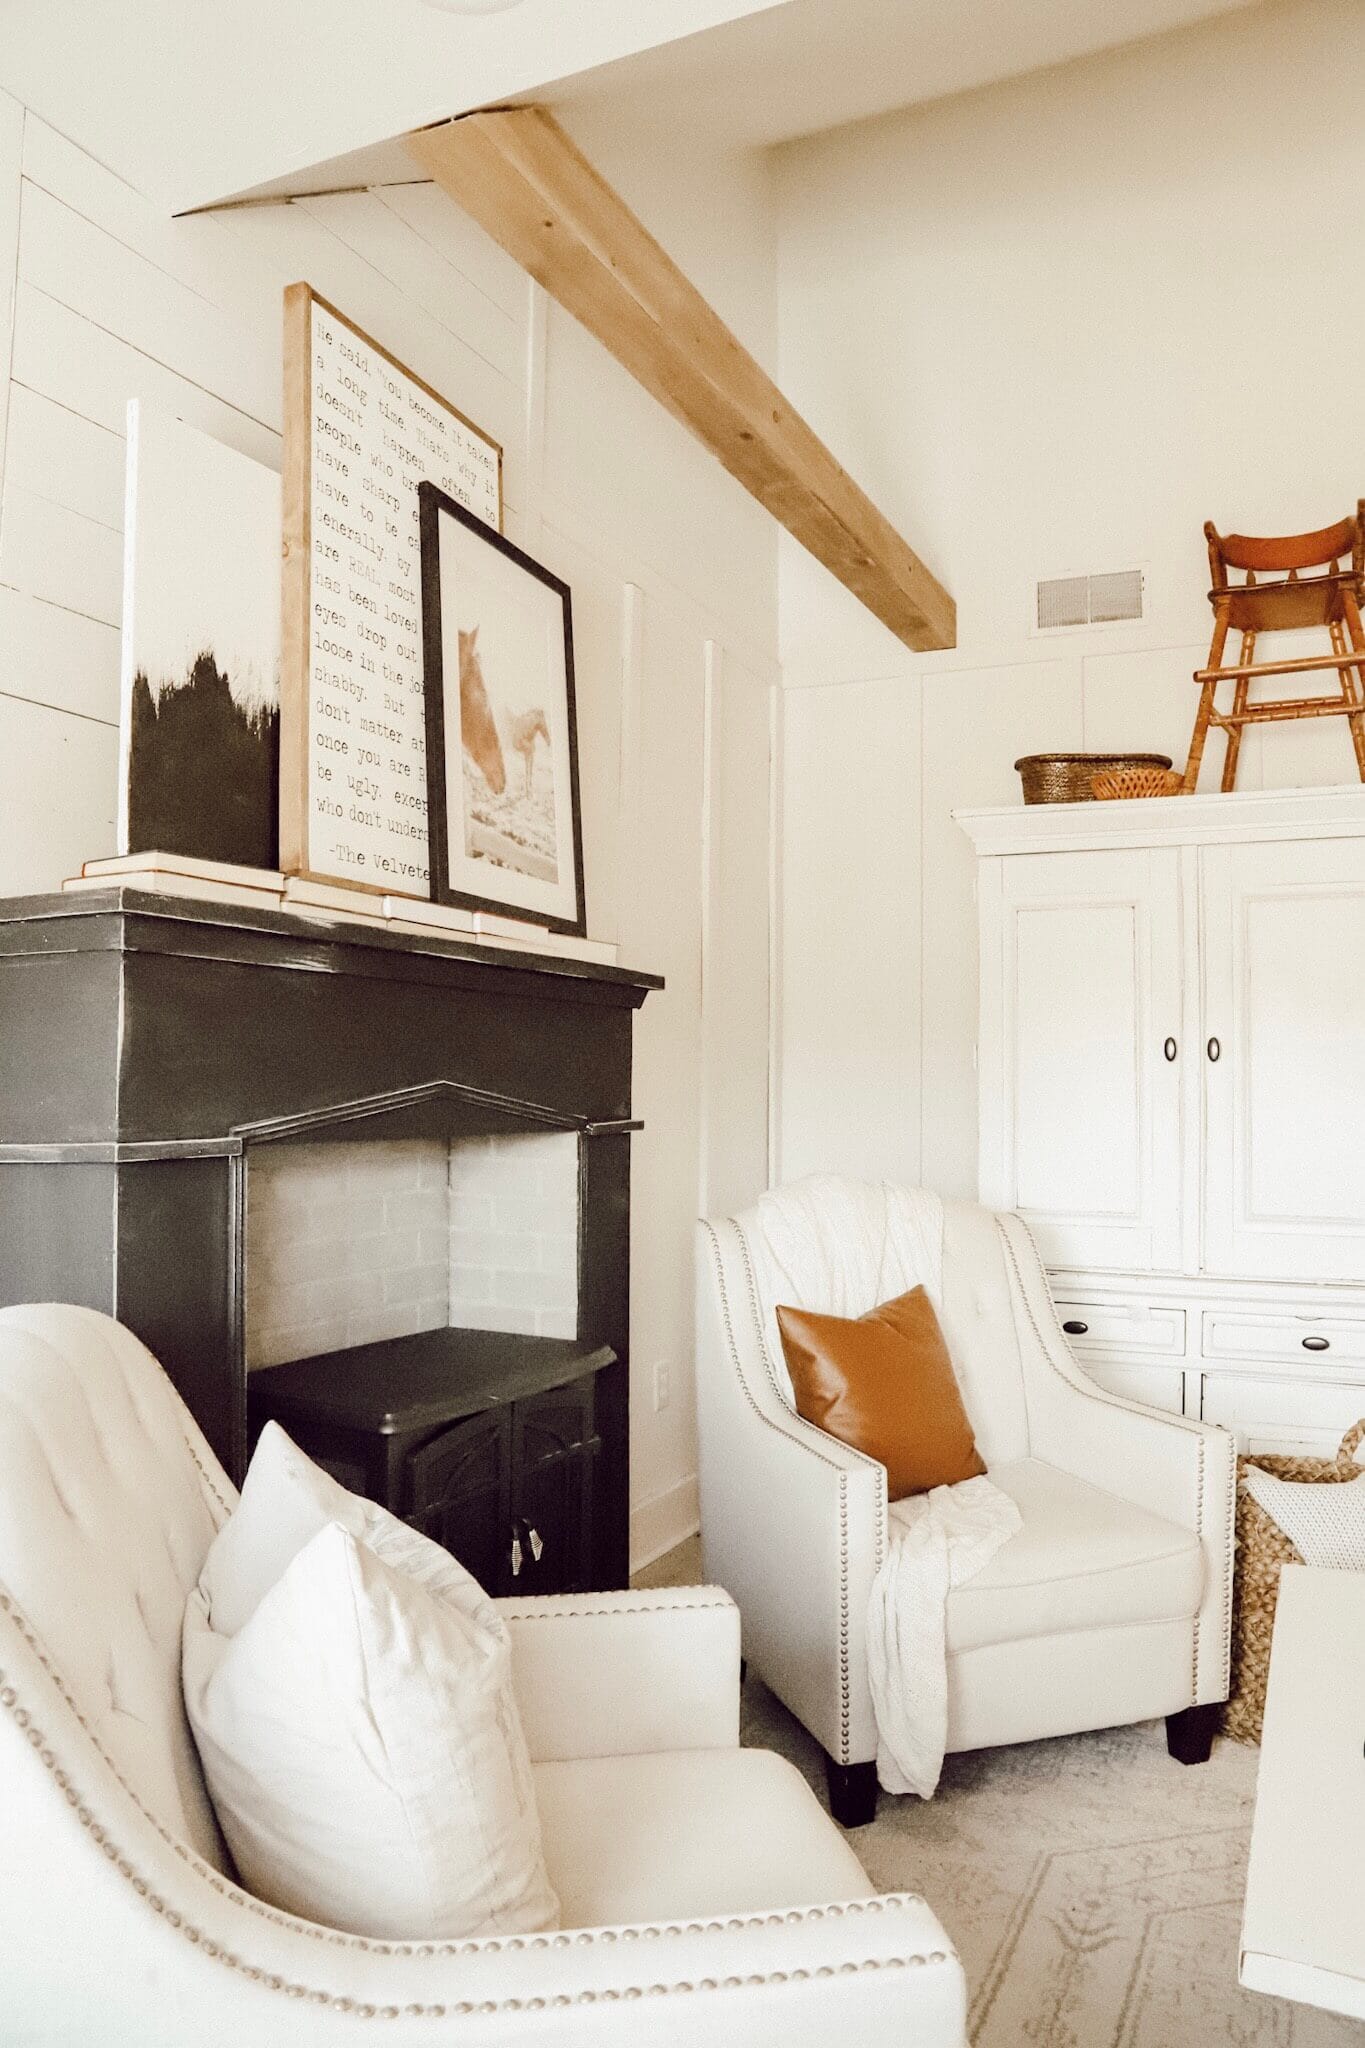 This space is amazing! Love the white along the striking painted fireplace in black, the wood beams and the horse art!